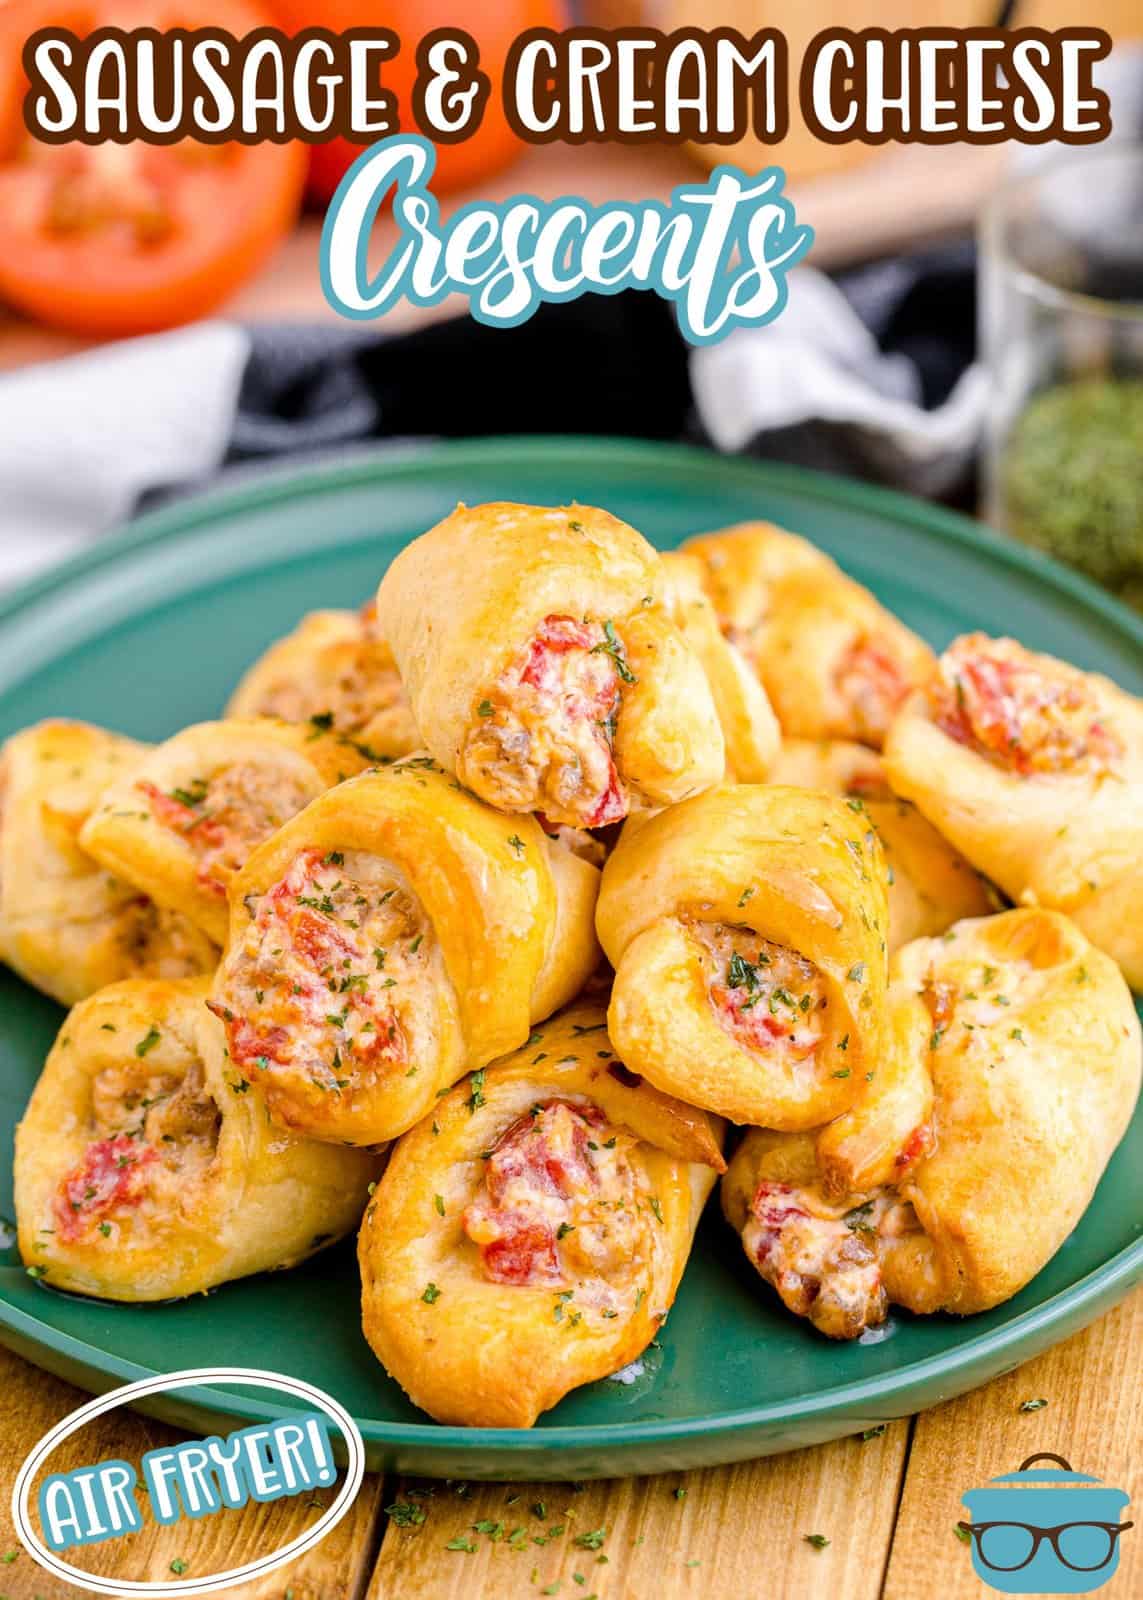 Pinterest image of Air Fryer Sausage and Cream Cheese Crescents on green plate with ingredients in background.